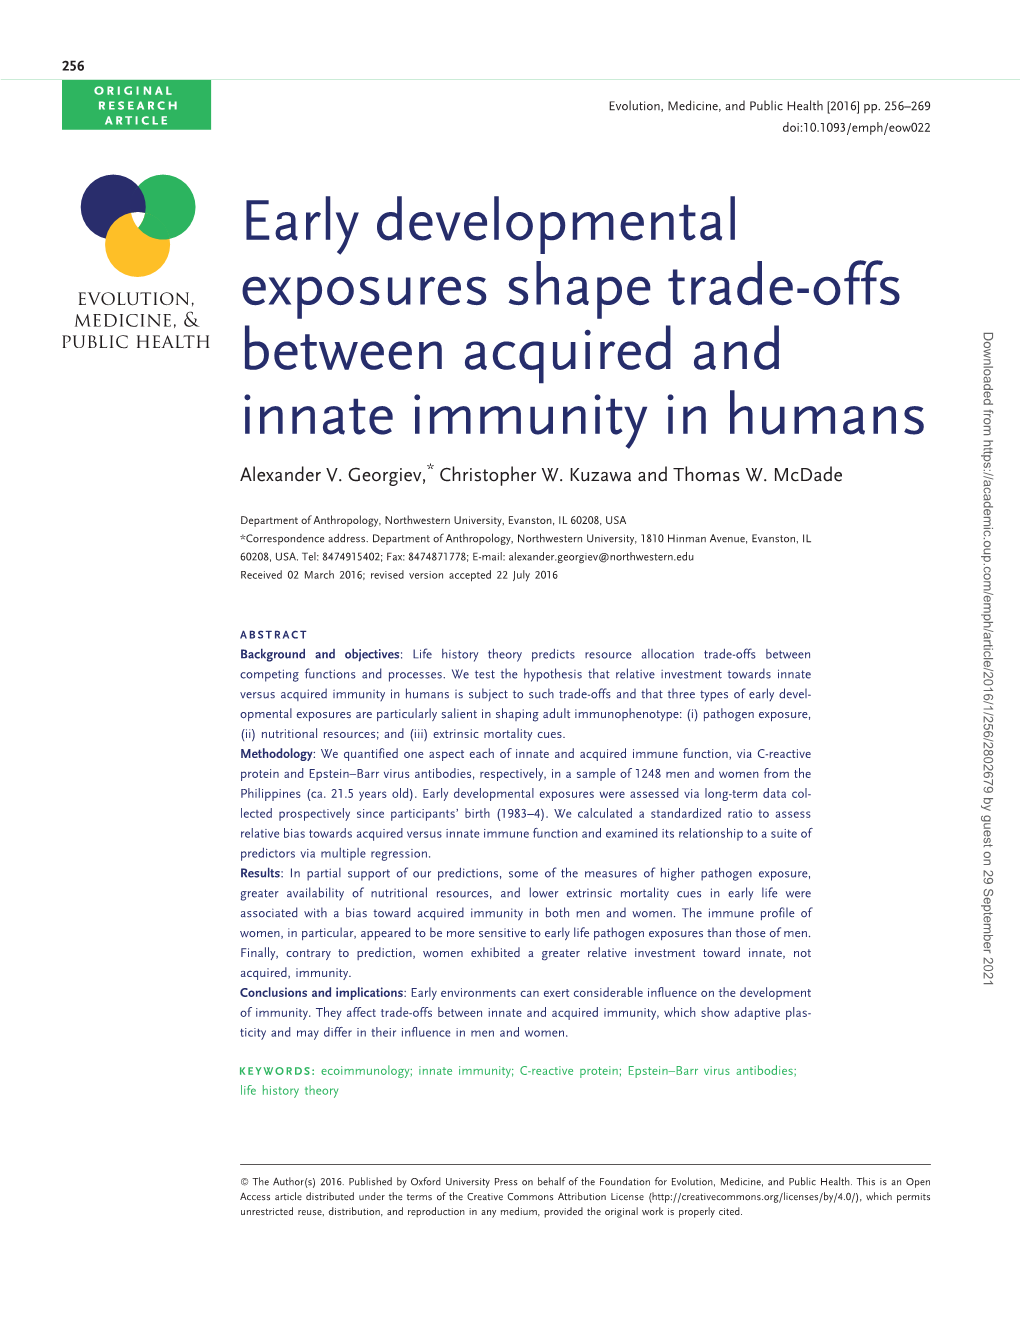 Early Developmental Exposures Shape Trade-Offs Between Acquired and Innate Immunity in Humans